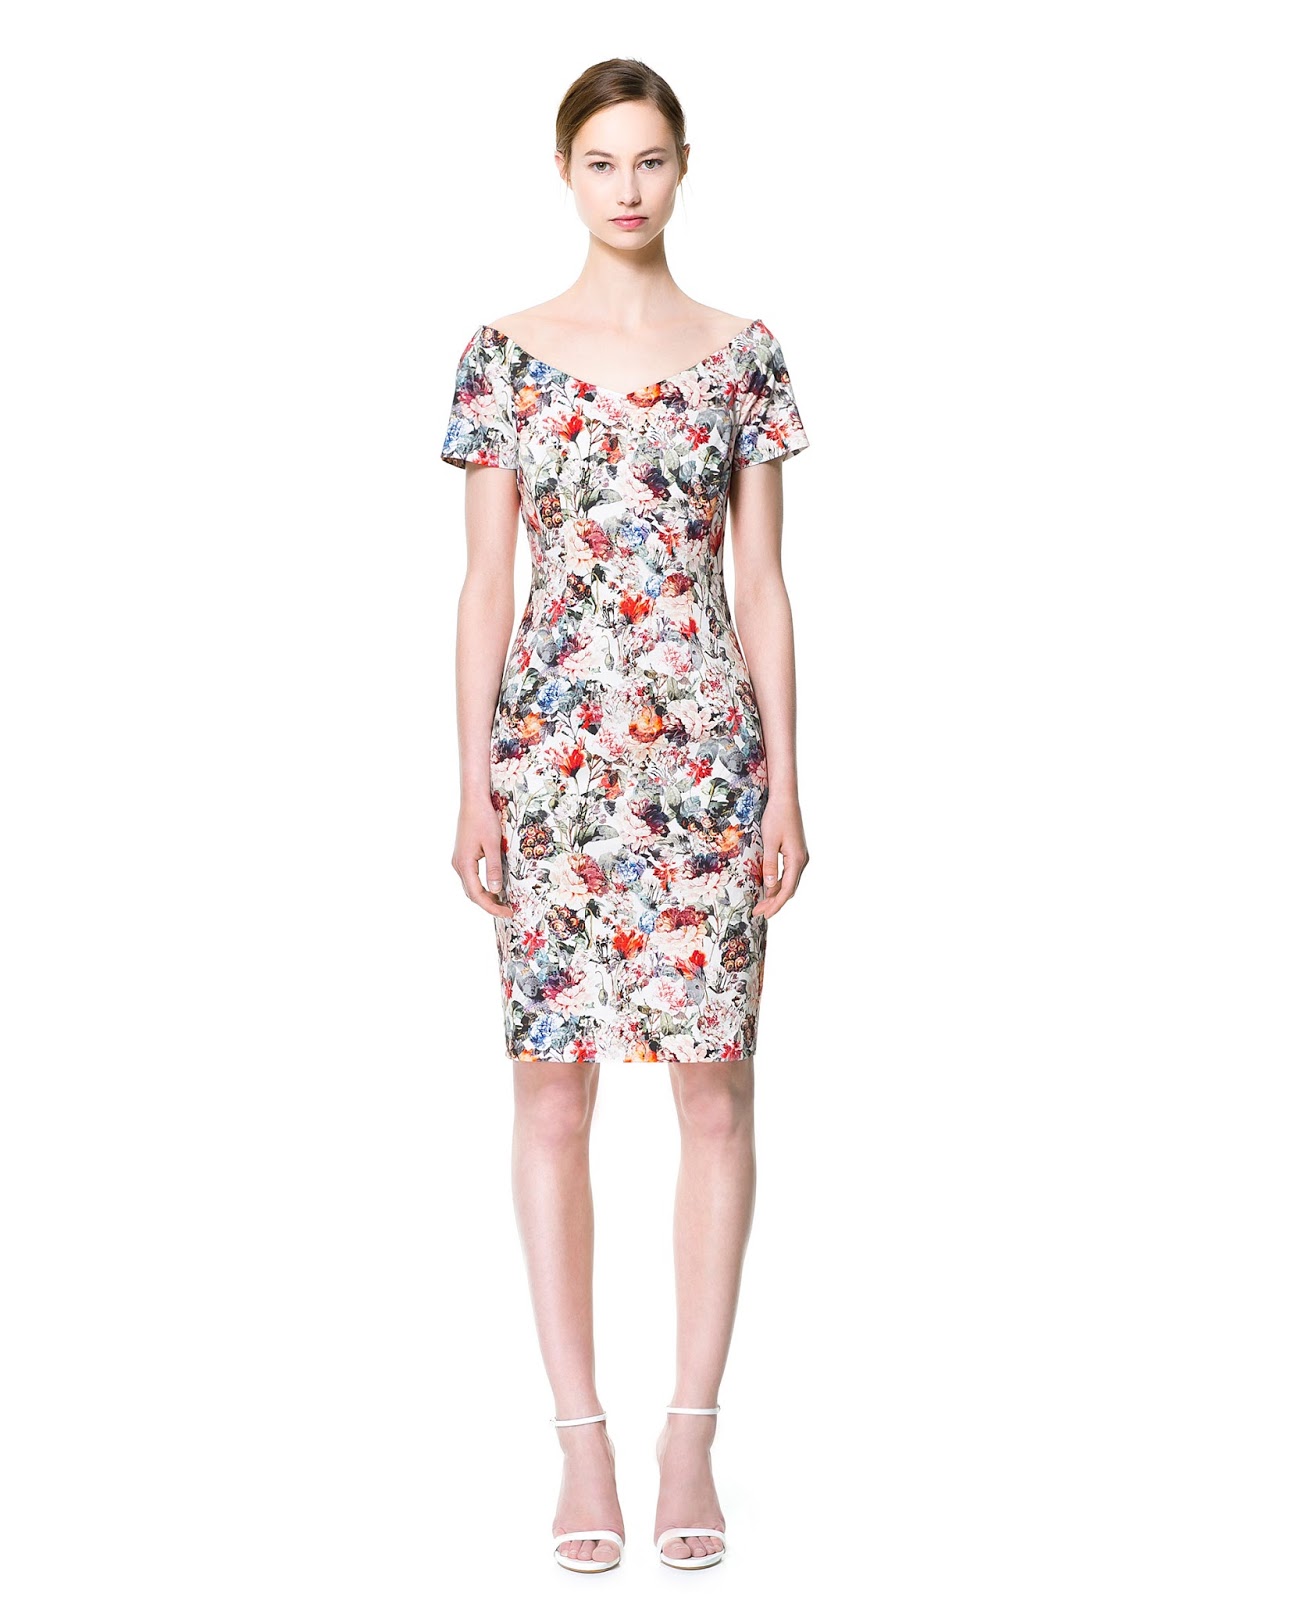 ... about ZARA NEW COLLECTION 2013. BOAT NECK FLORAL PRINT PRINTED DRESS